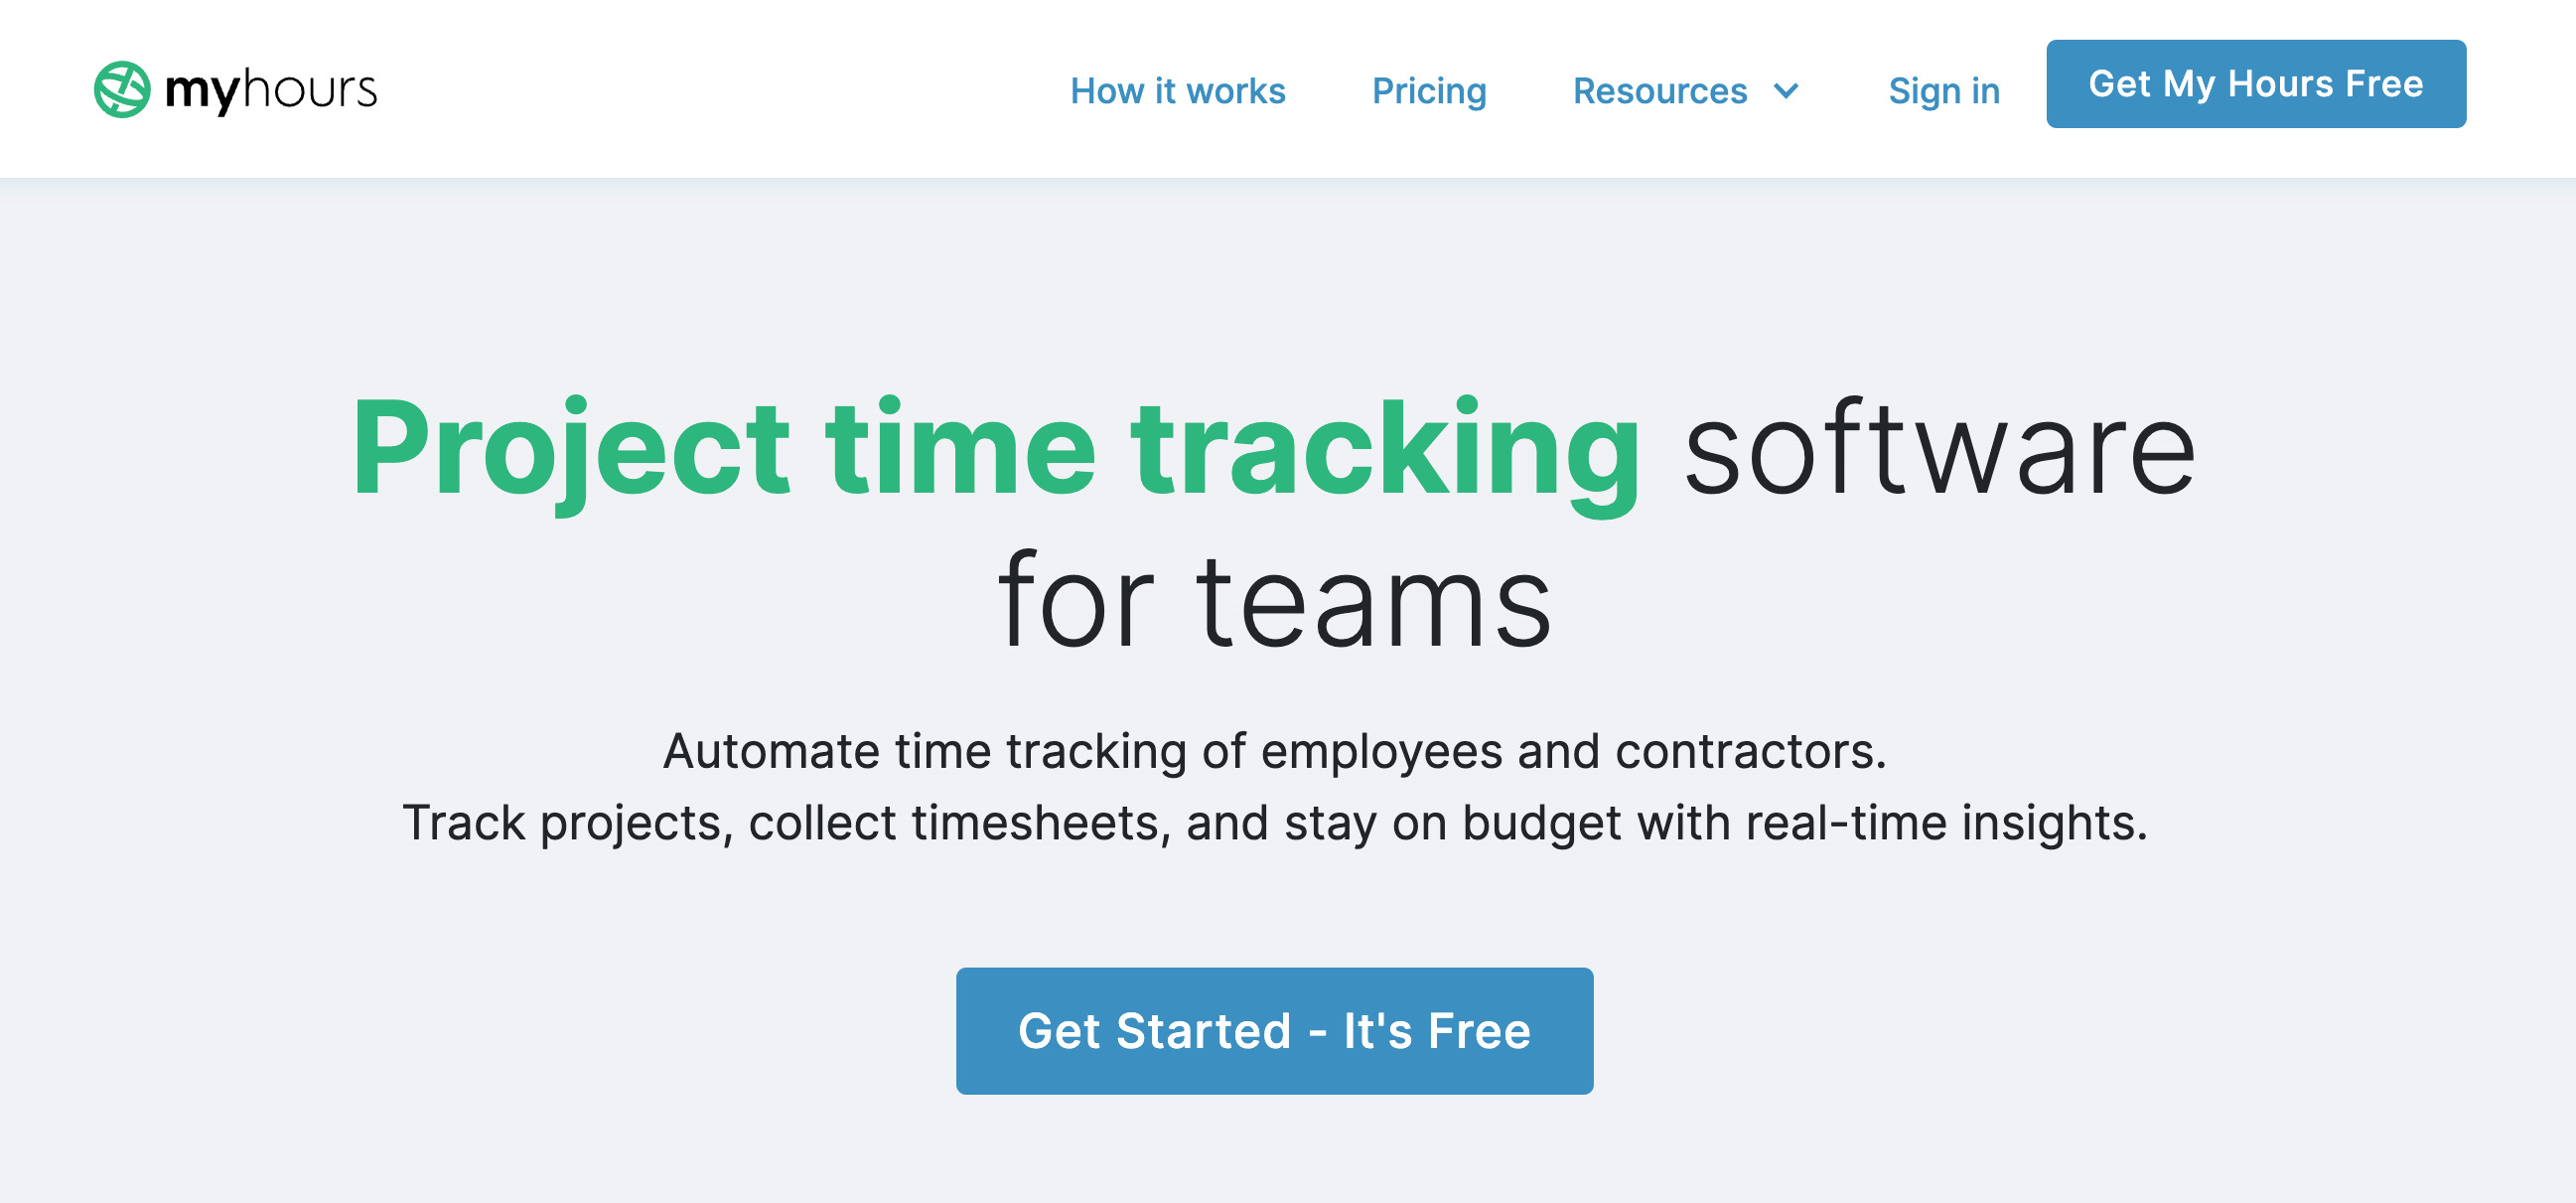 My Hours homepage: Project time tracking software for teams